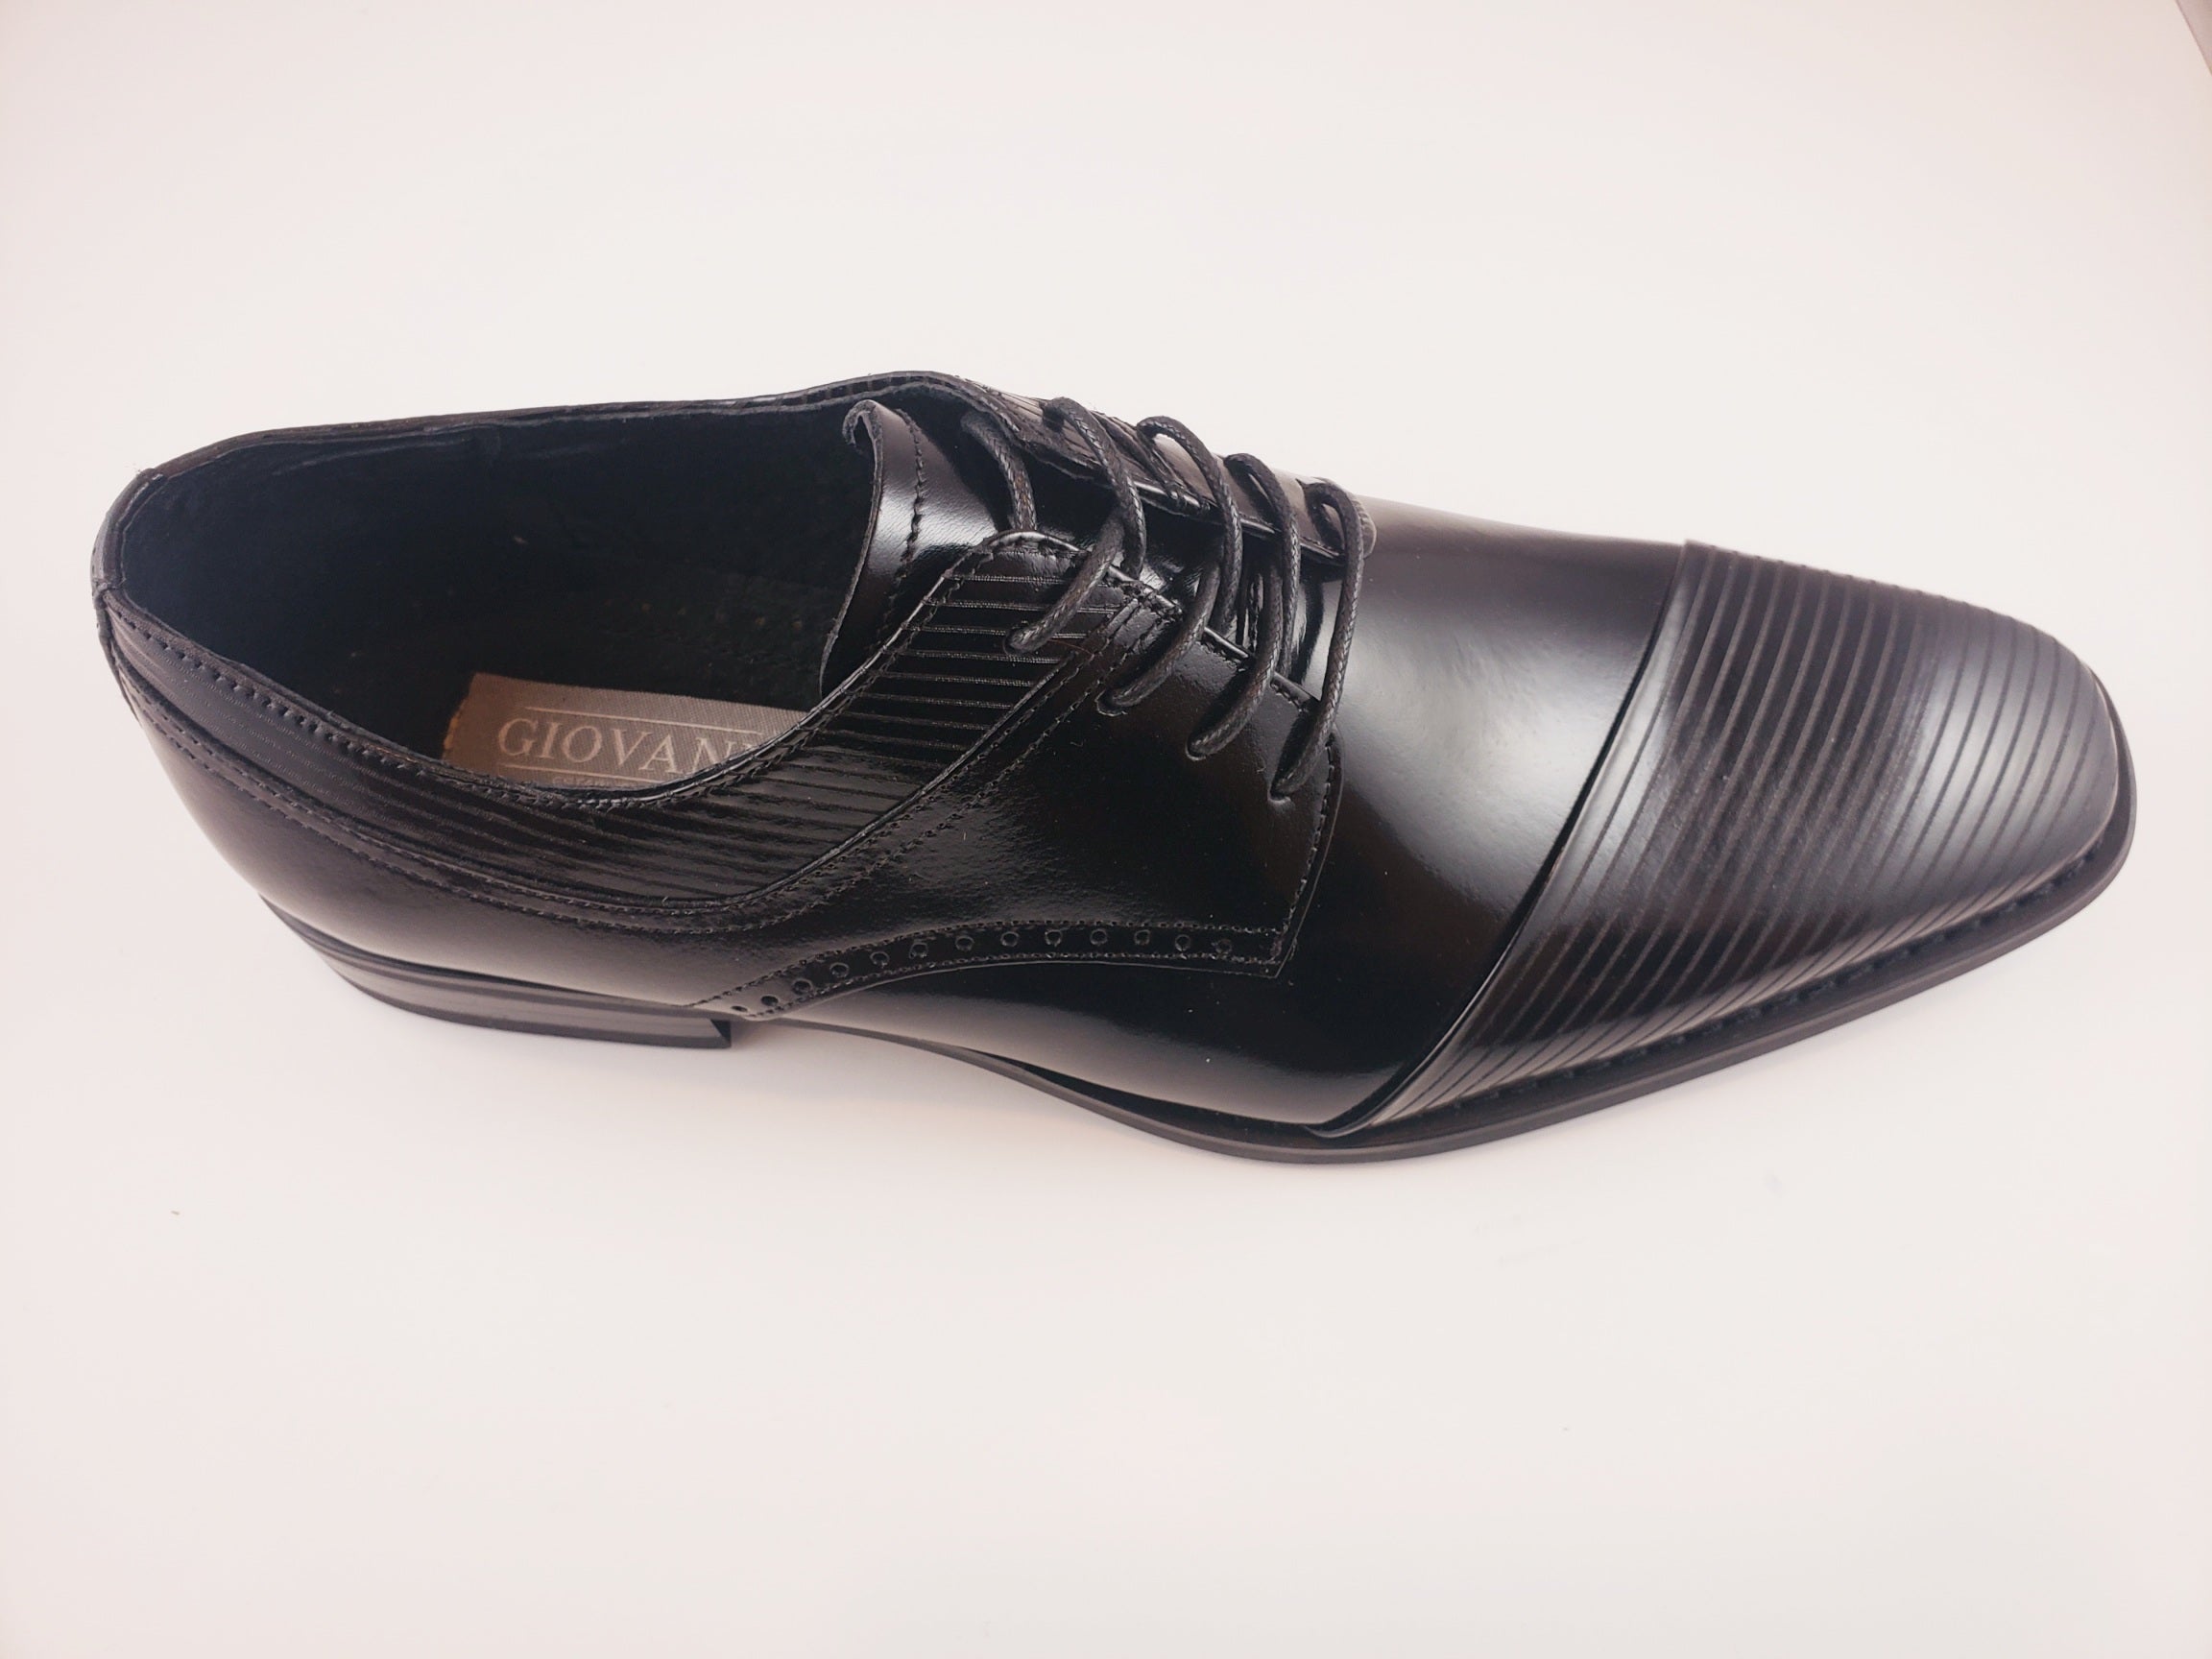 Giovani Lace up shoes